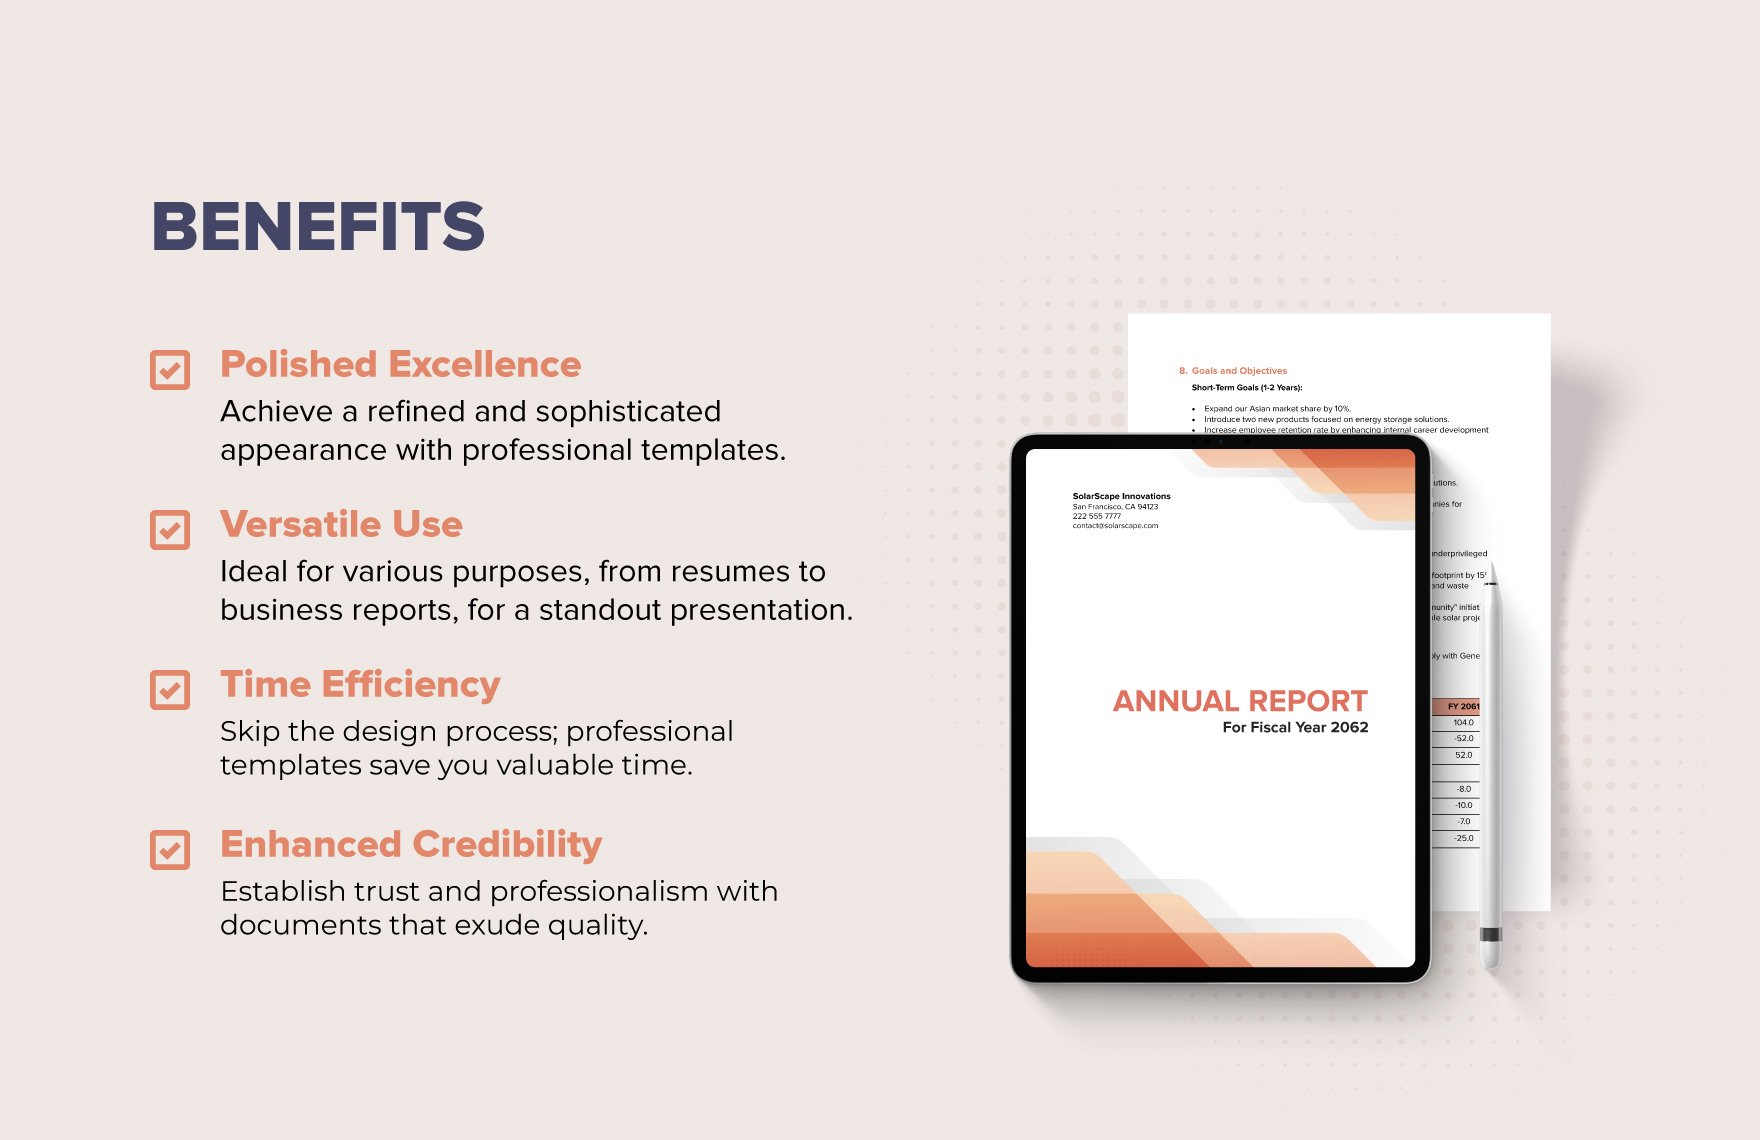 Professional Annual Report Template